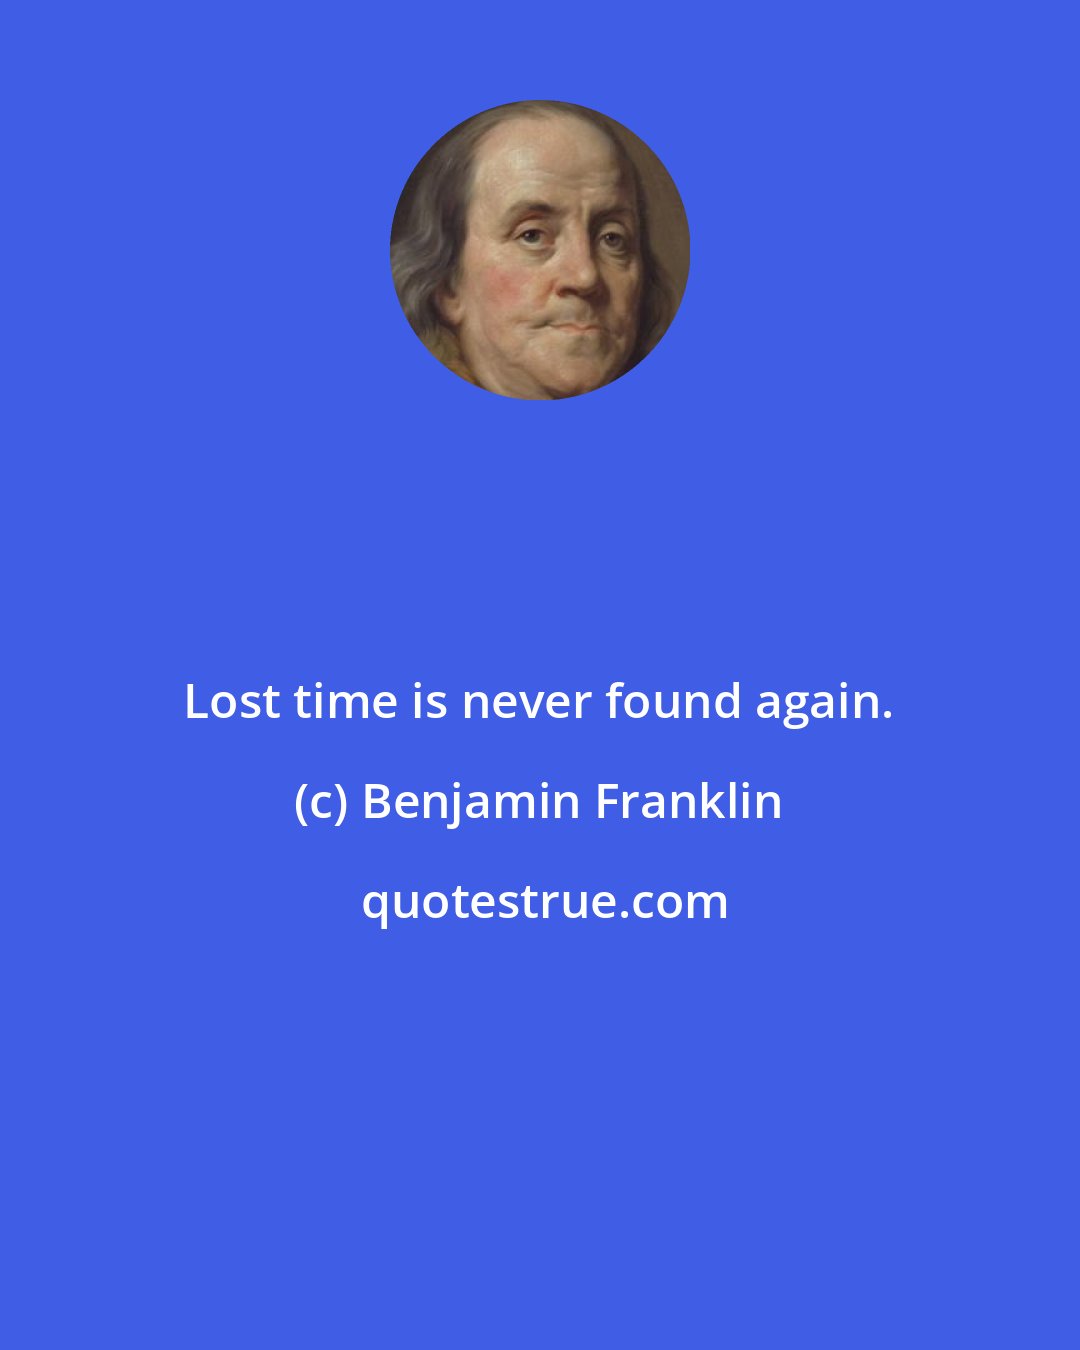 Benjamin Franklin: Lost time is never found again.